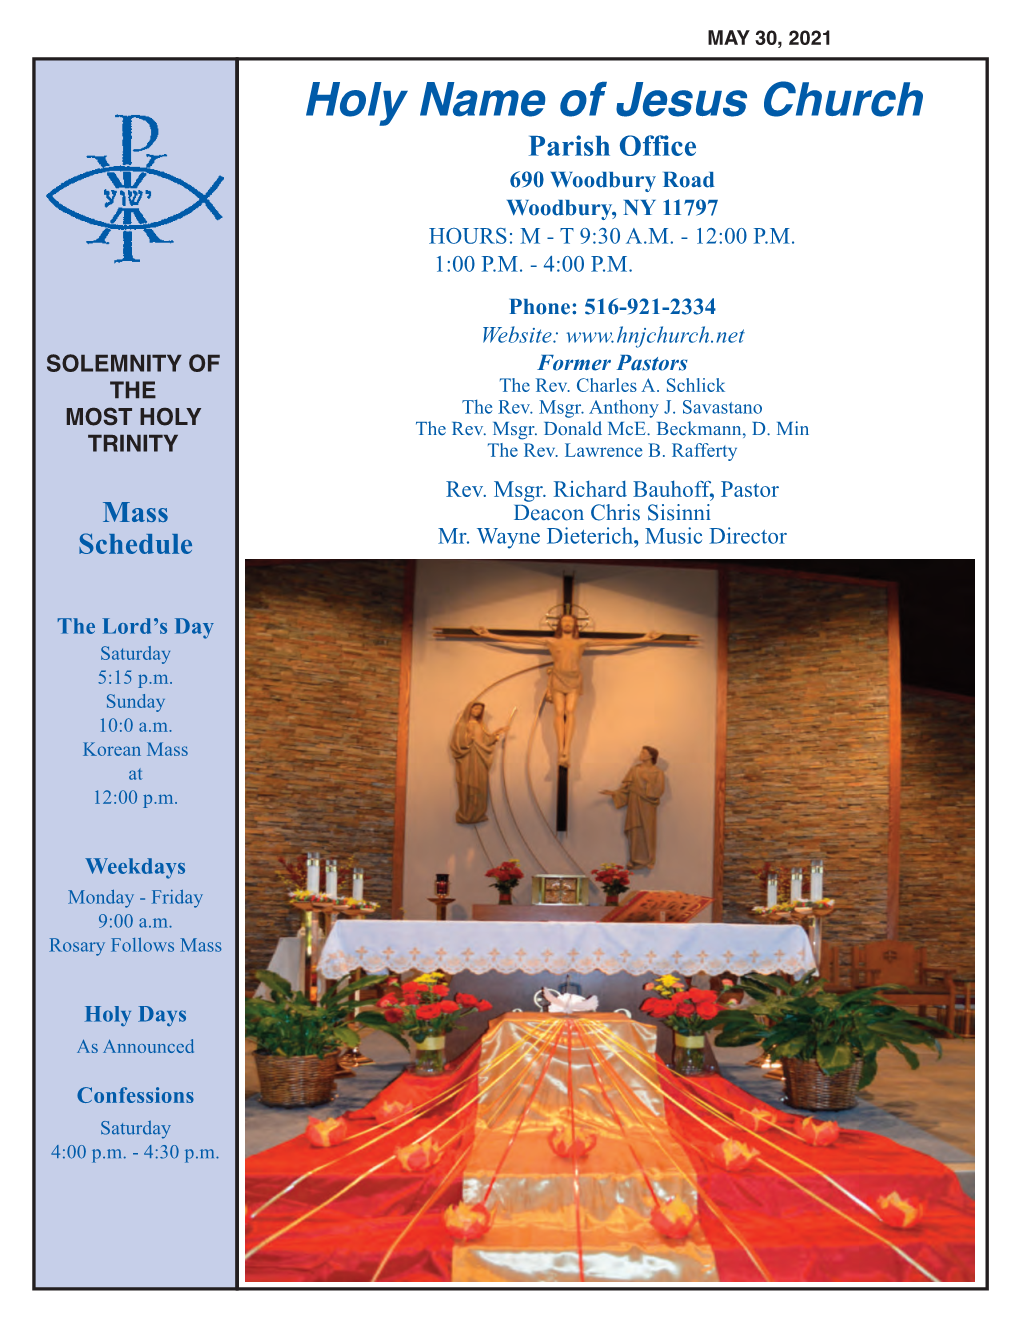 Holy Name of Jesus Church Page 2